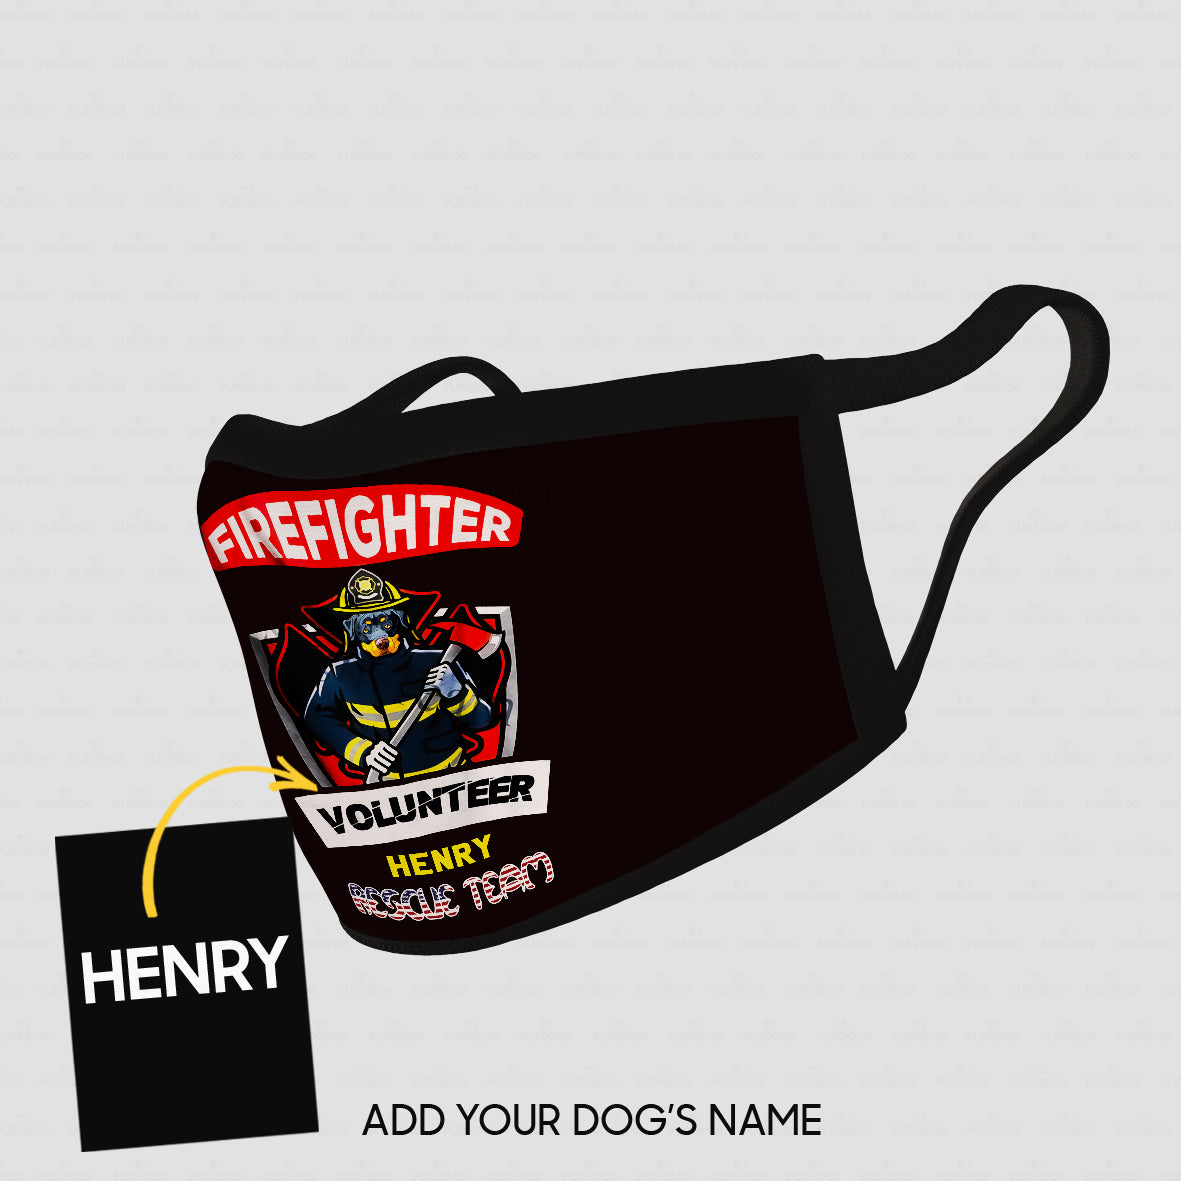 Personalized Dog Gift Idea - Firefighter Volunteer Rescue Team For Dog Lovers - Cloth Mask